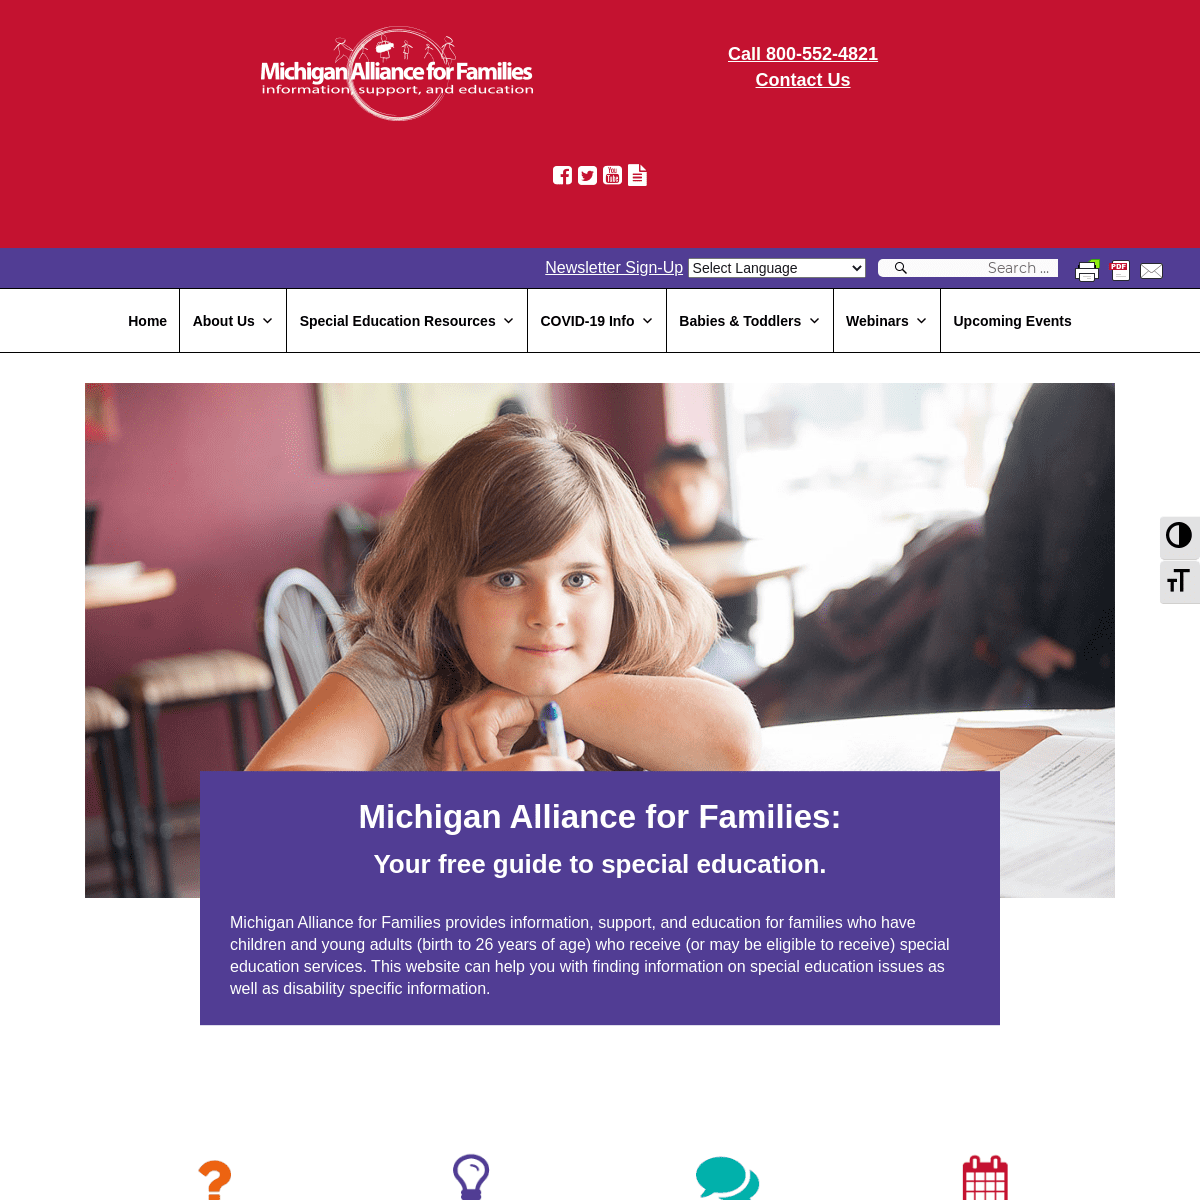 A complete backup of https://michiganallianceforfamilies.org